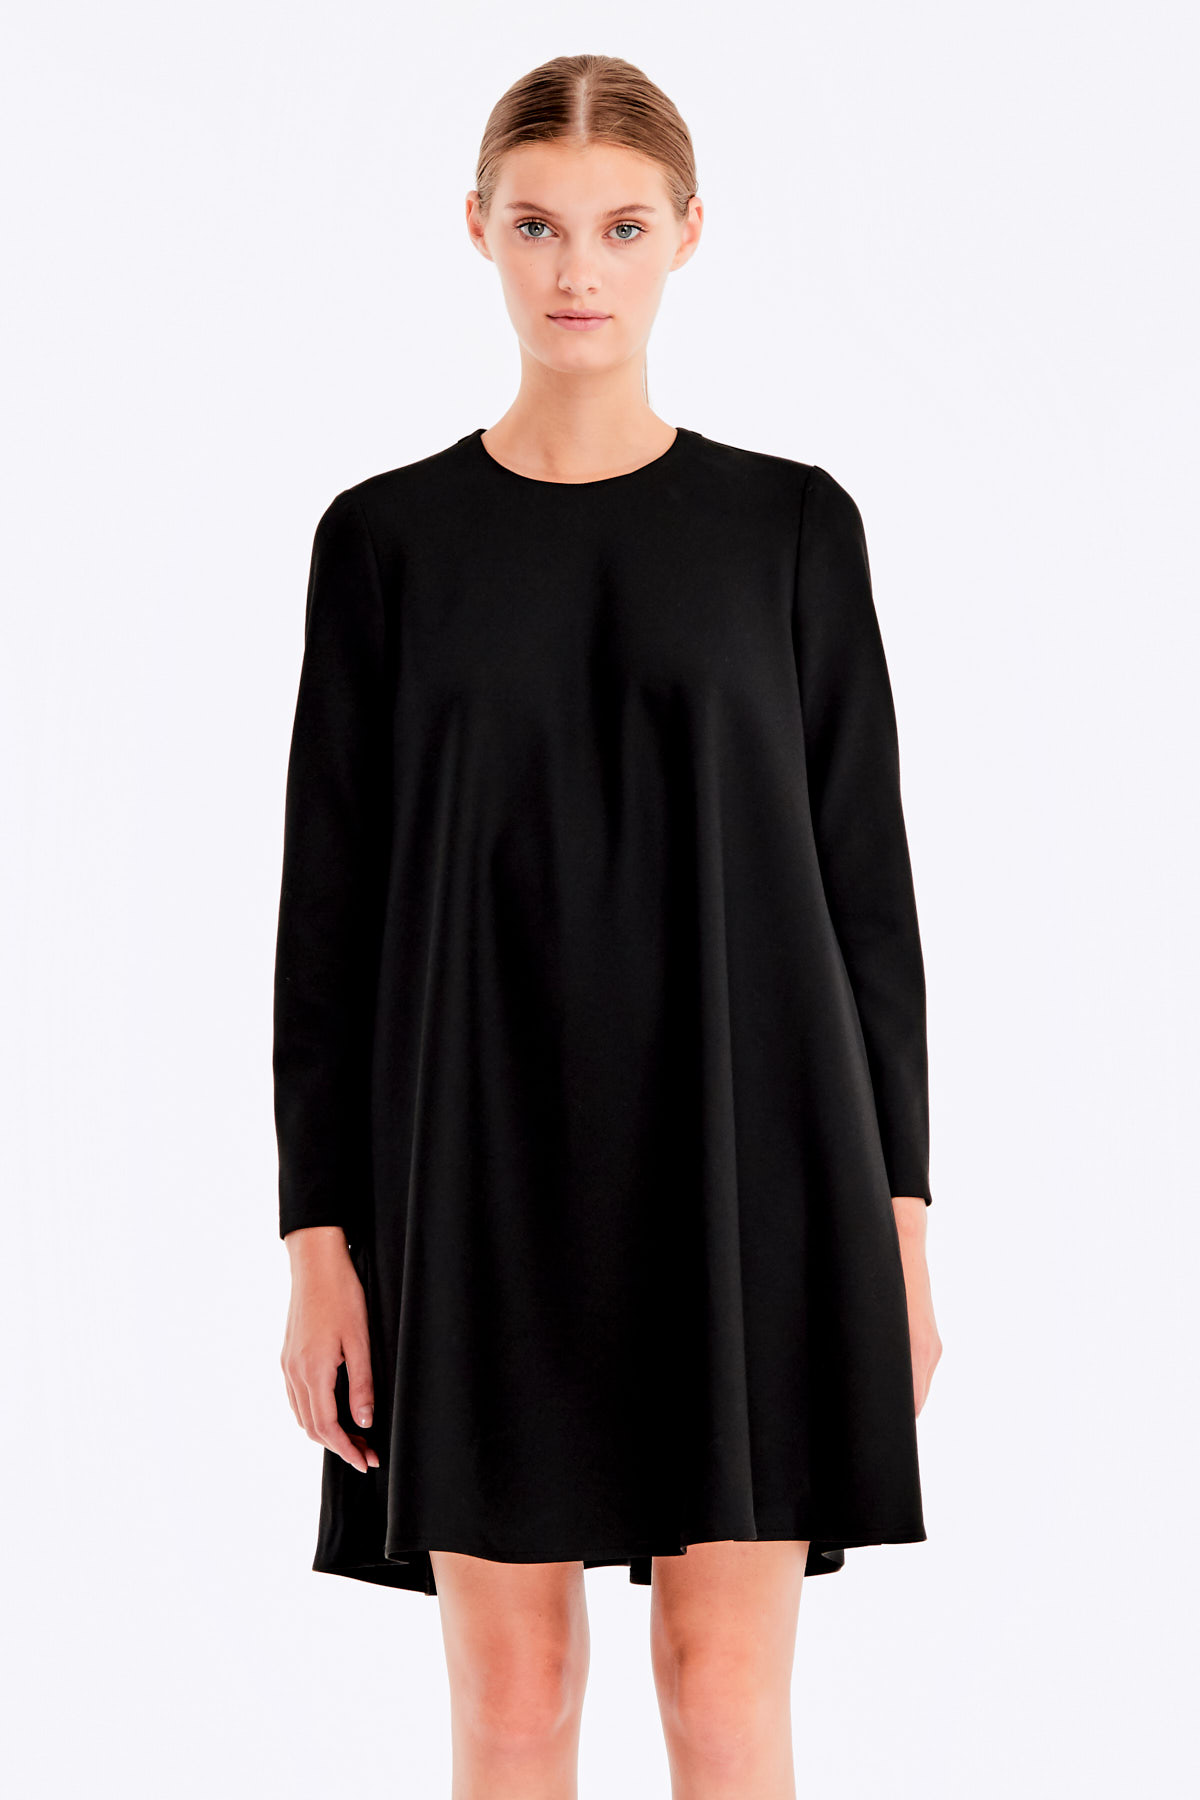 Loose-fitting black dress with a white collar , photo 9